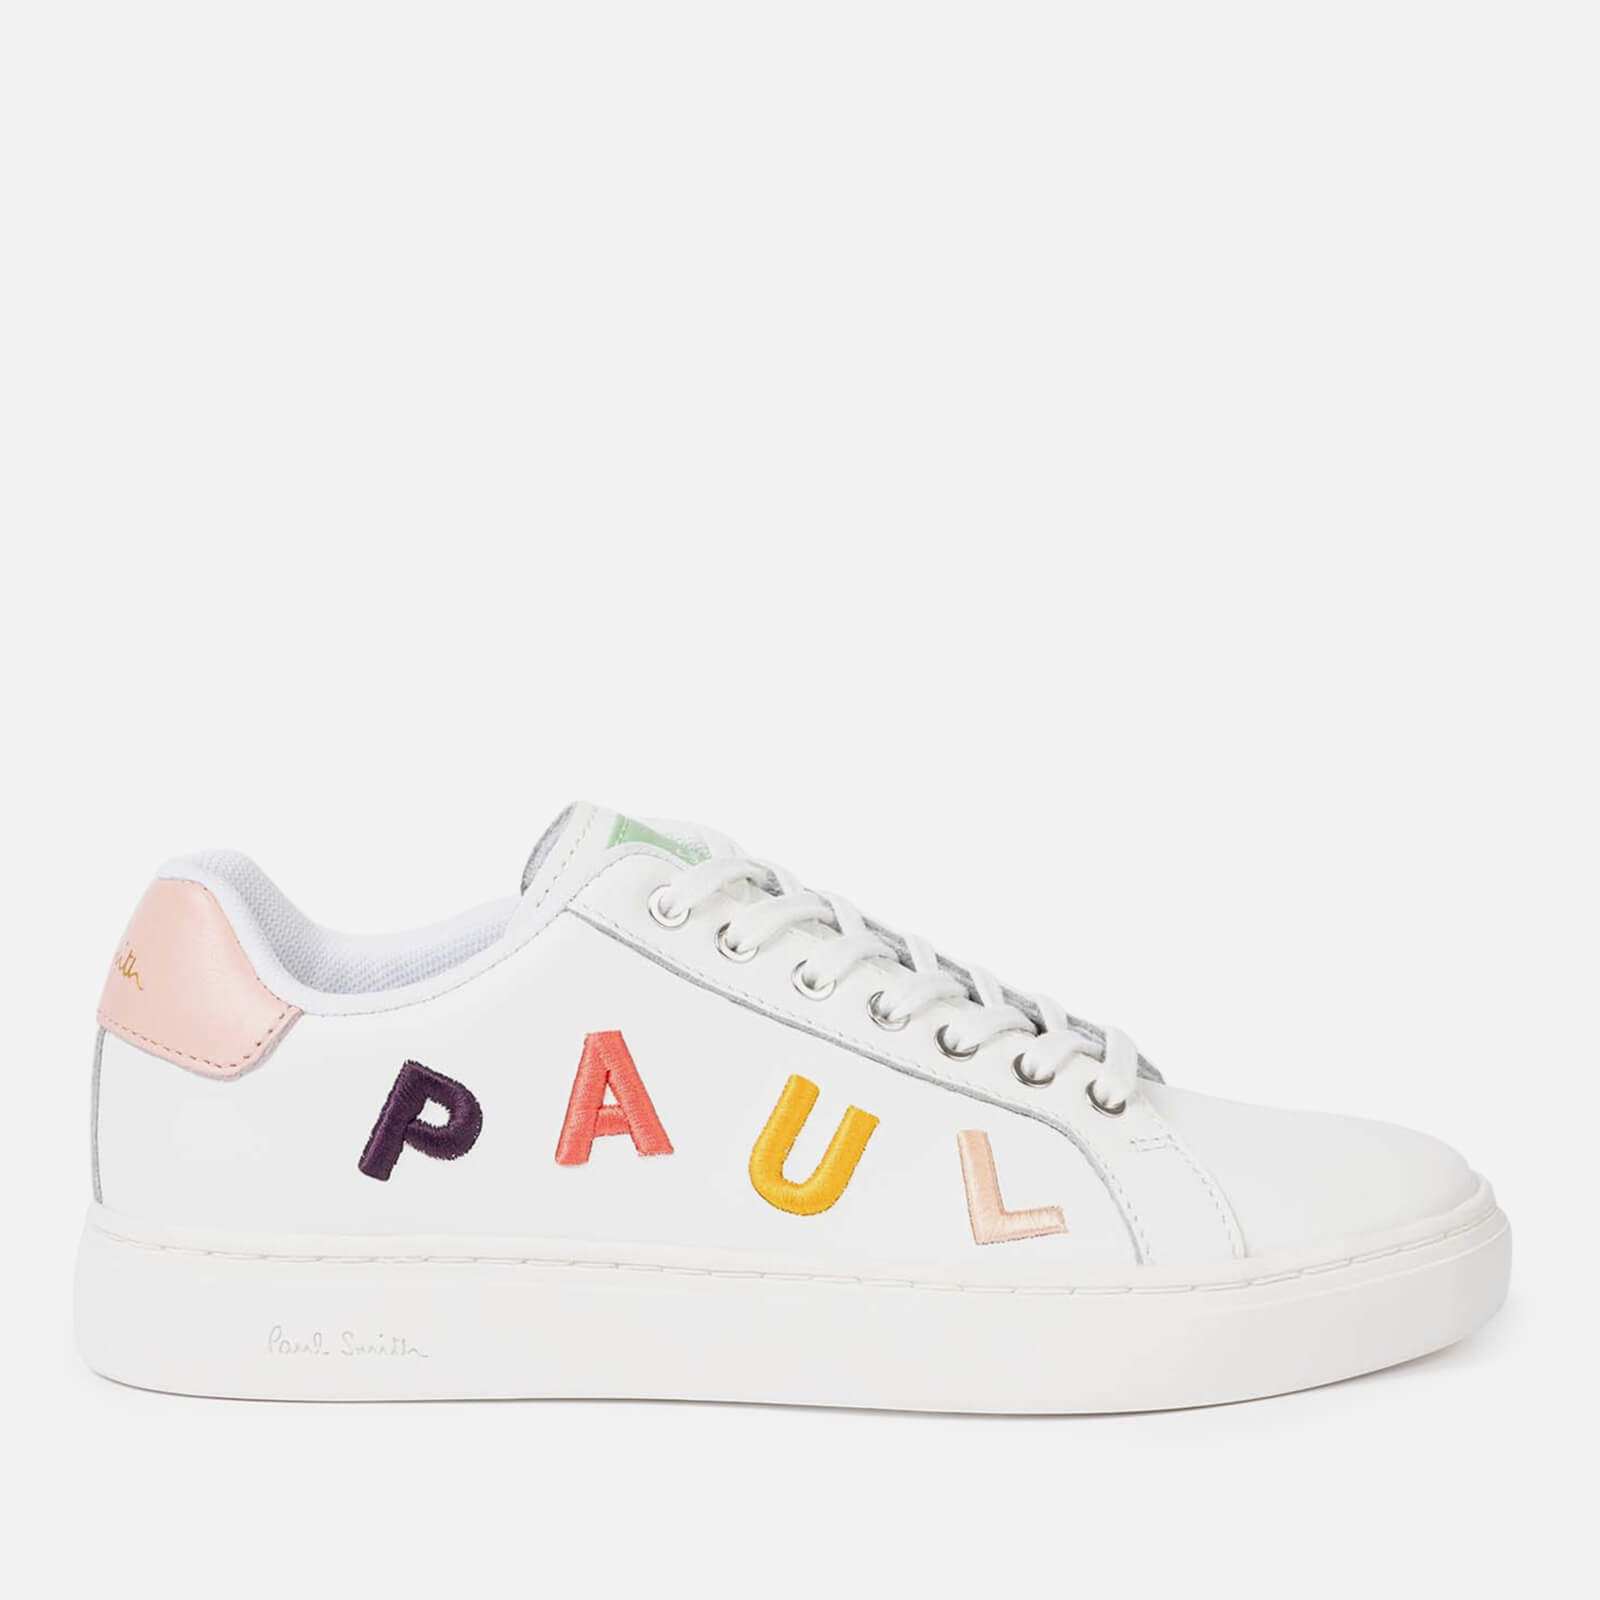 Paul Smith Women’s Lapin Letters Leather Trainers